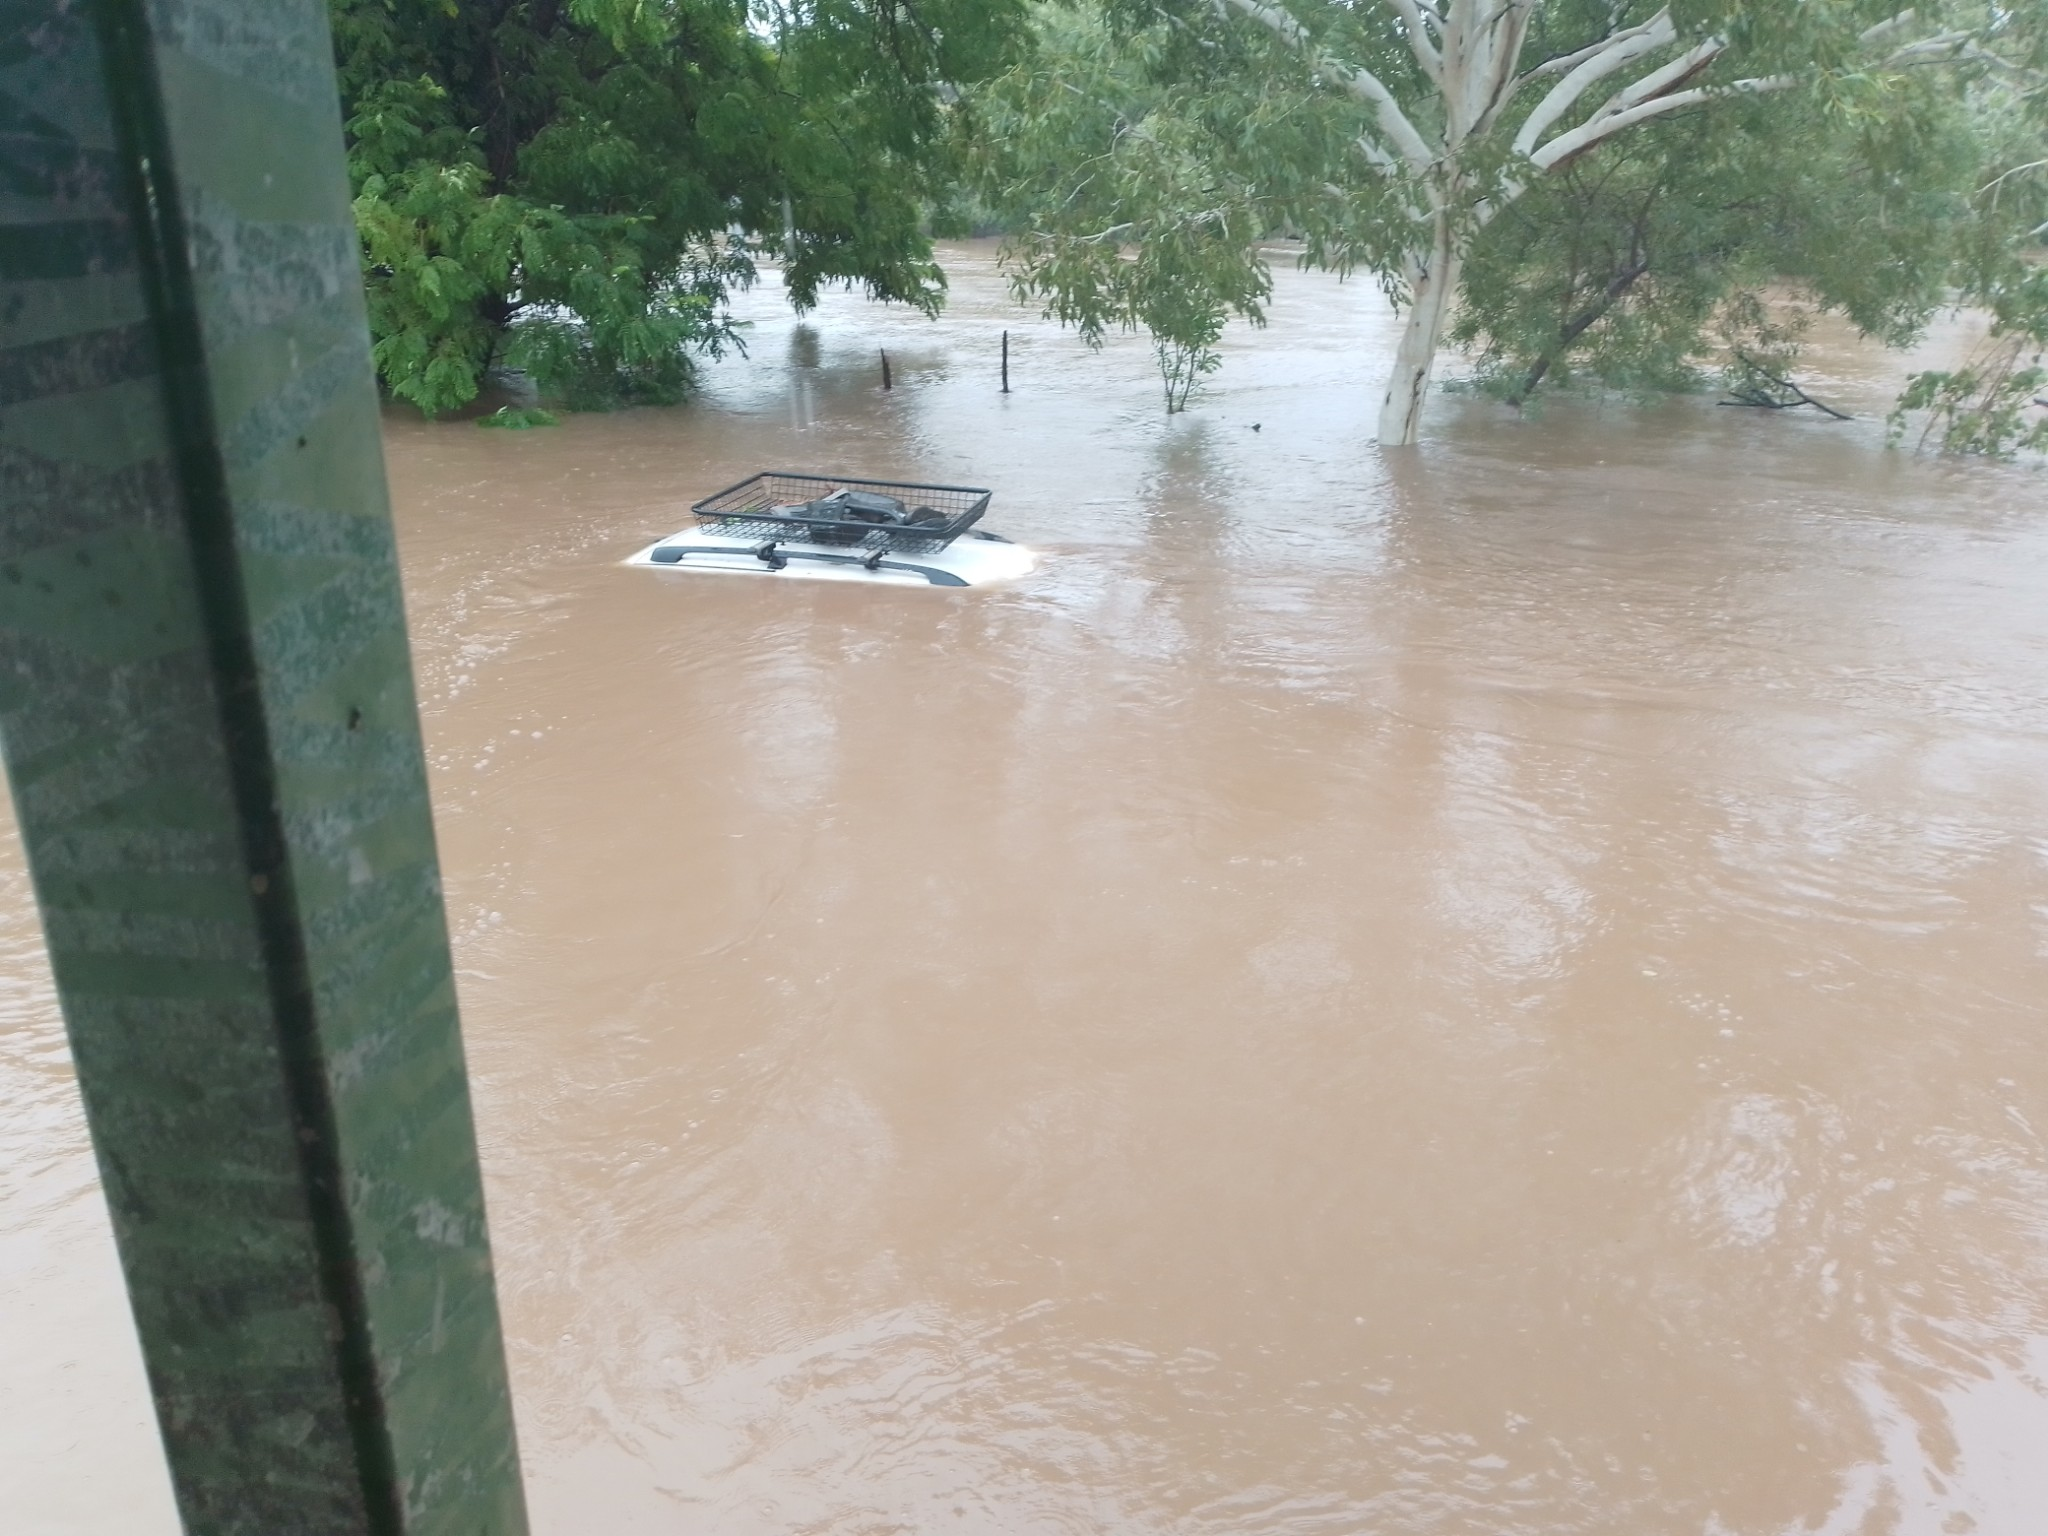 Fitzroy Crossing is in major flood, and the river is still rising. 